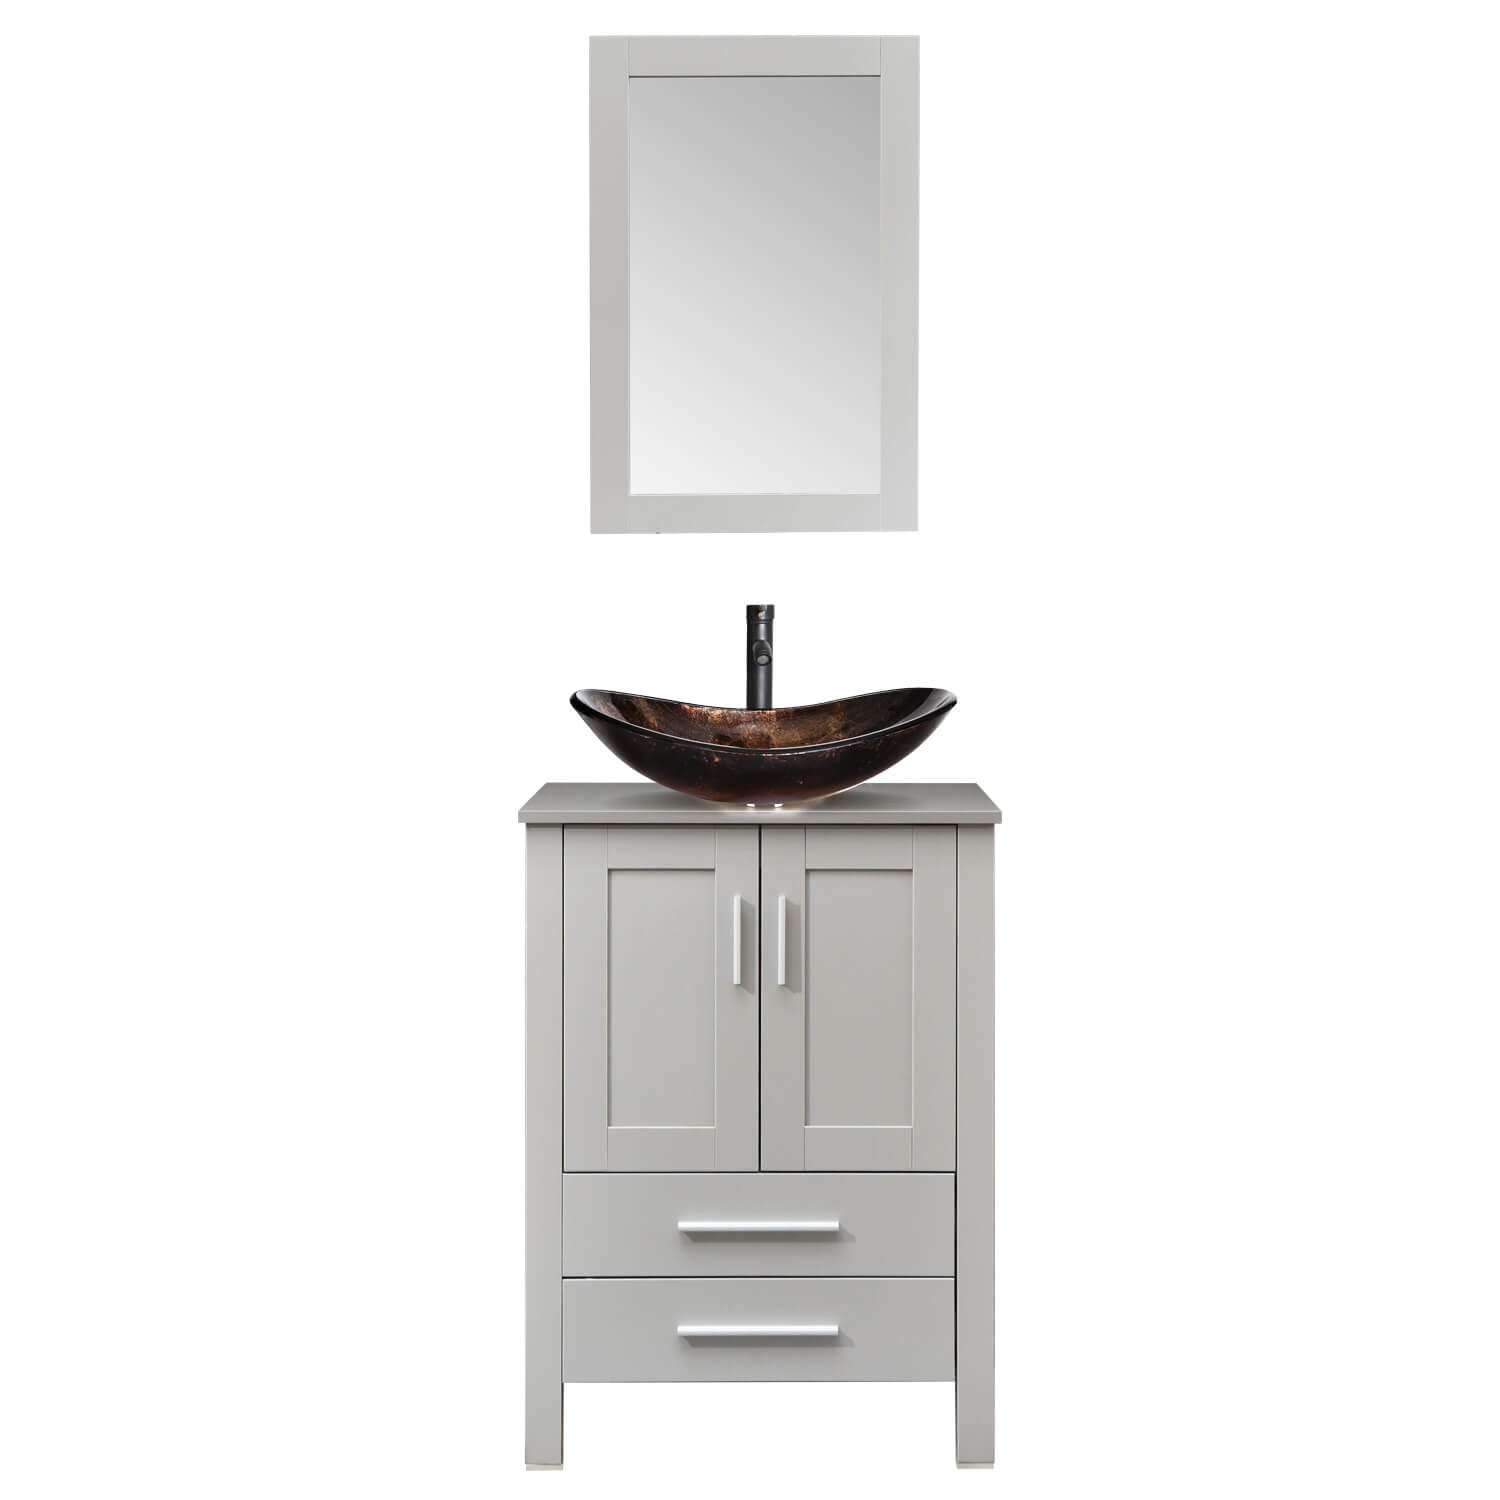 Elecwish gray wood bathroom vanity with gold boat glass sink BA20065 in white background